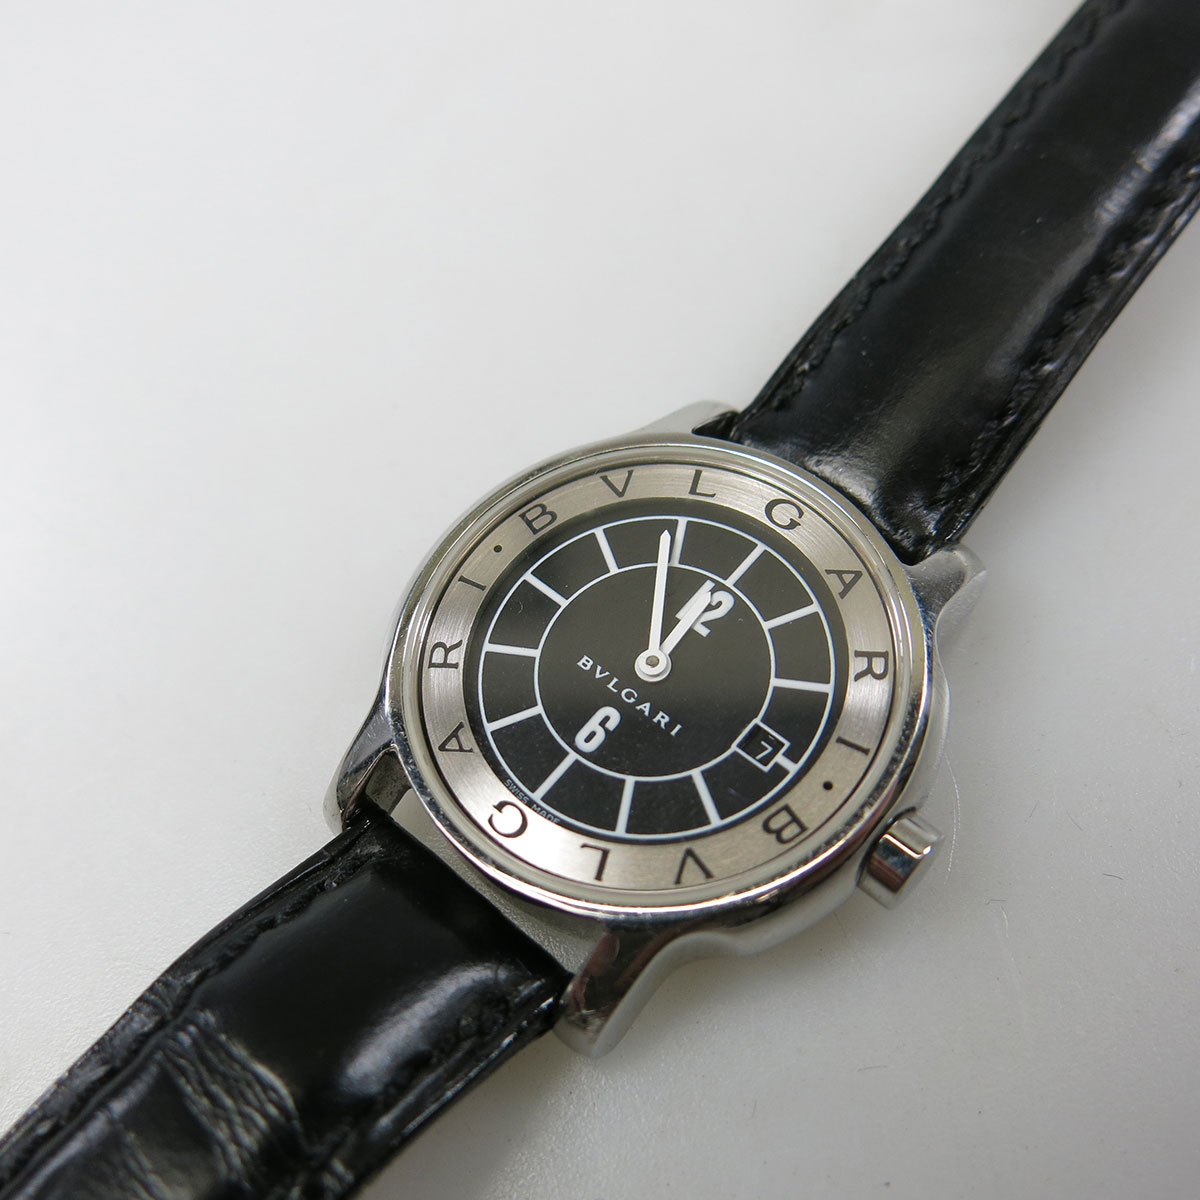 Bvlgari “Solotempo” Wristwatch, With Date